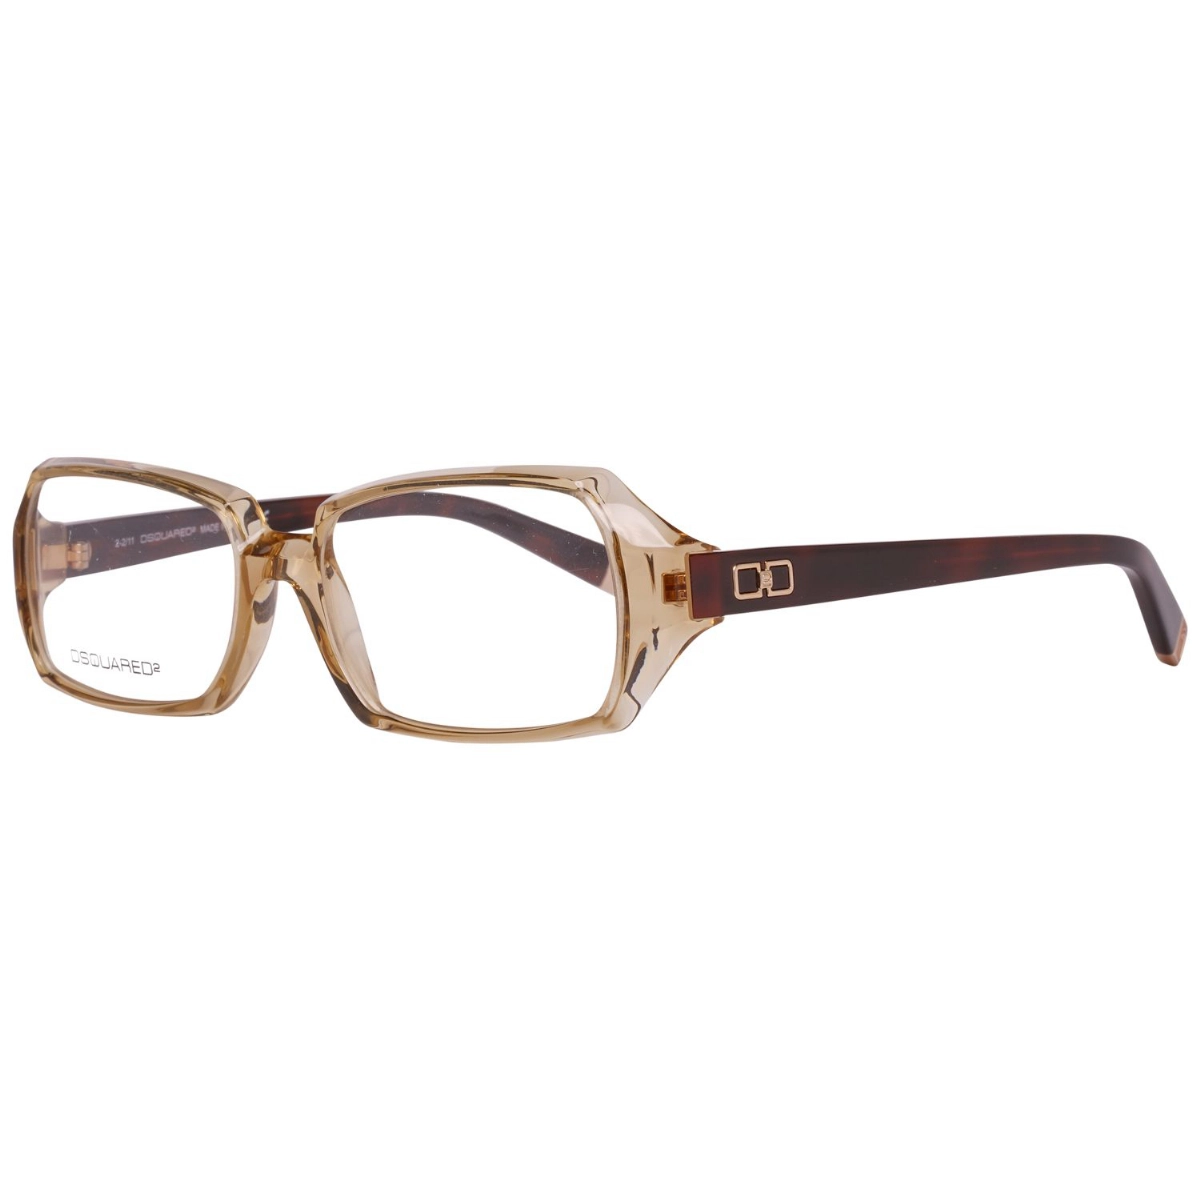 GLASSES FOR WOMAN DSQUARED2 DQ5019-045-54